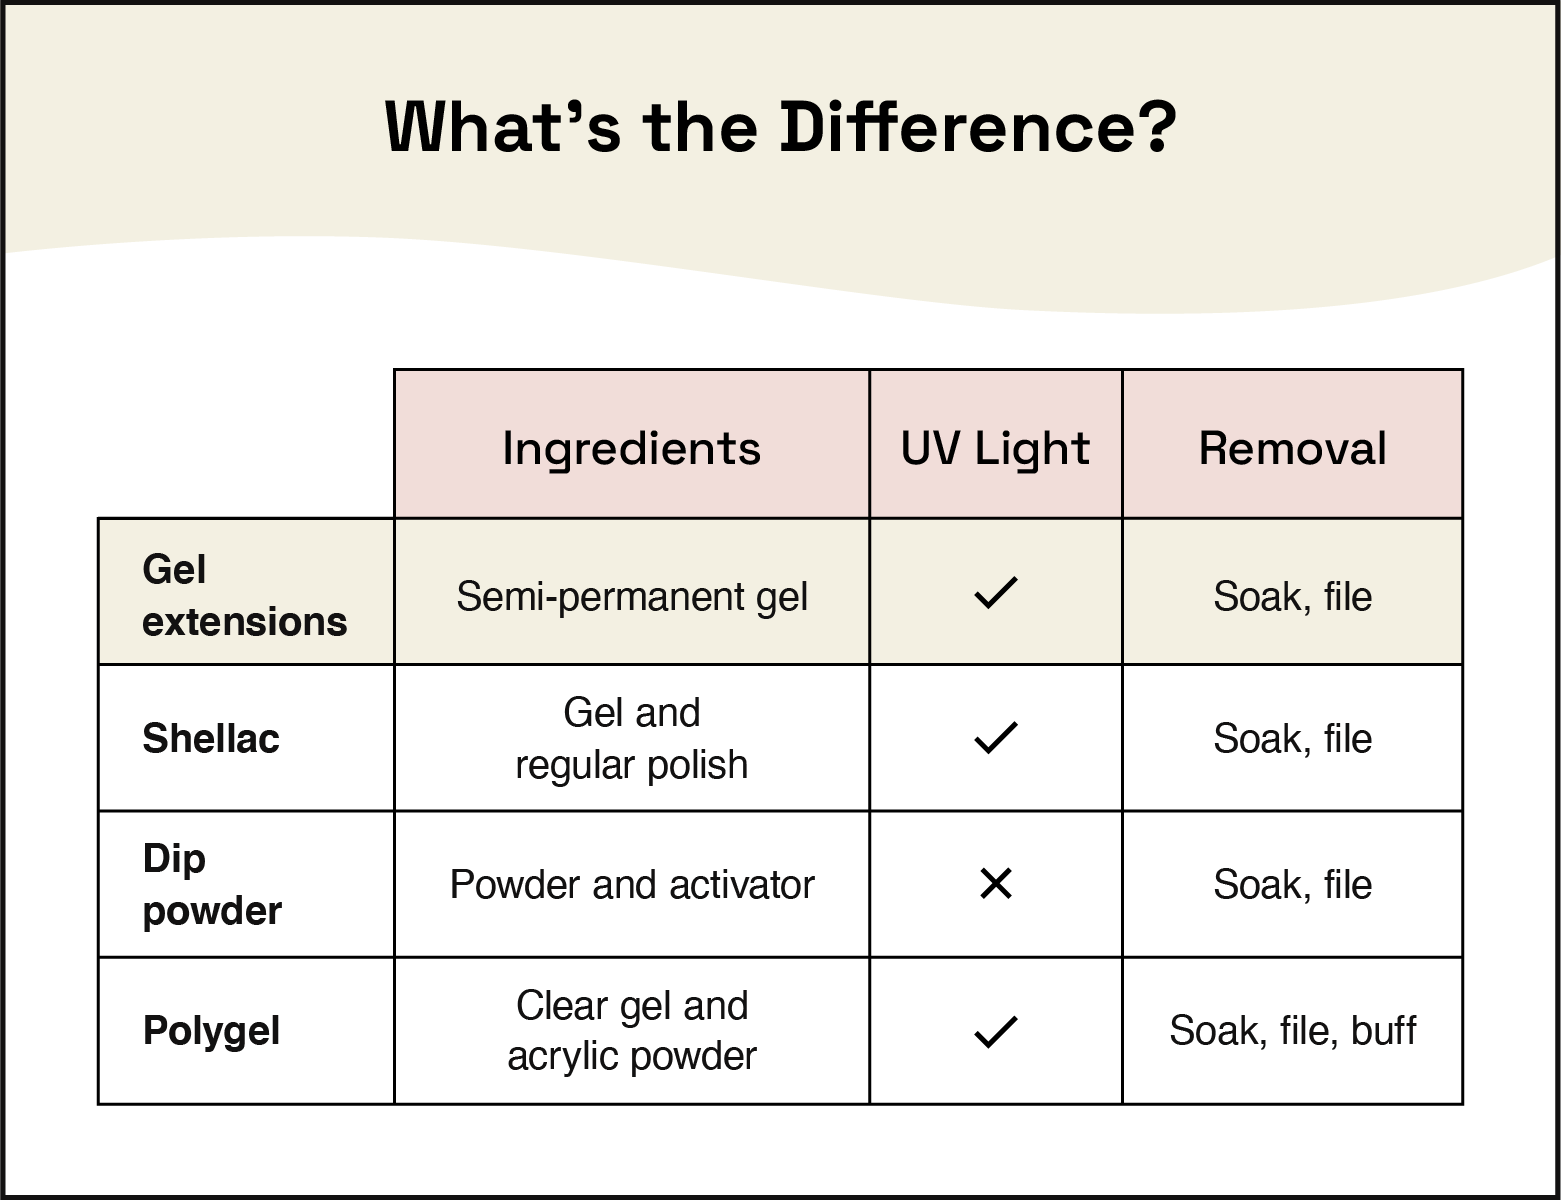 table highlighting differences between gel extensions, shella, dip powder, and polygel